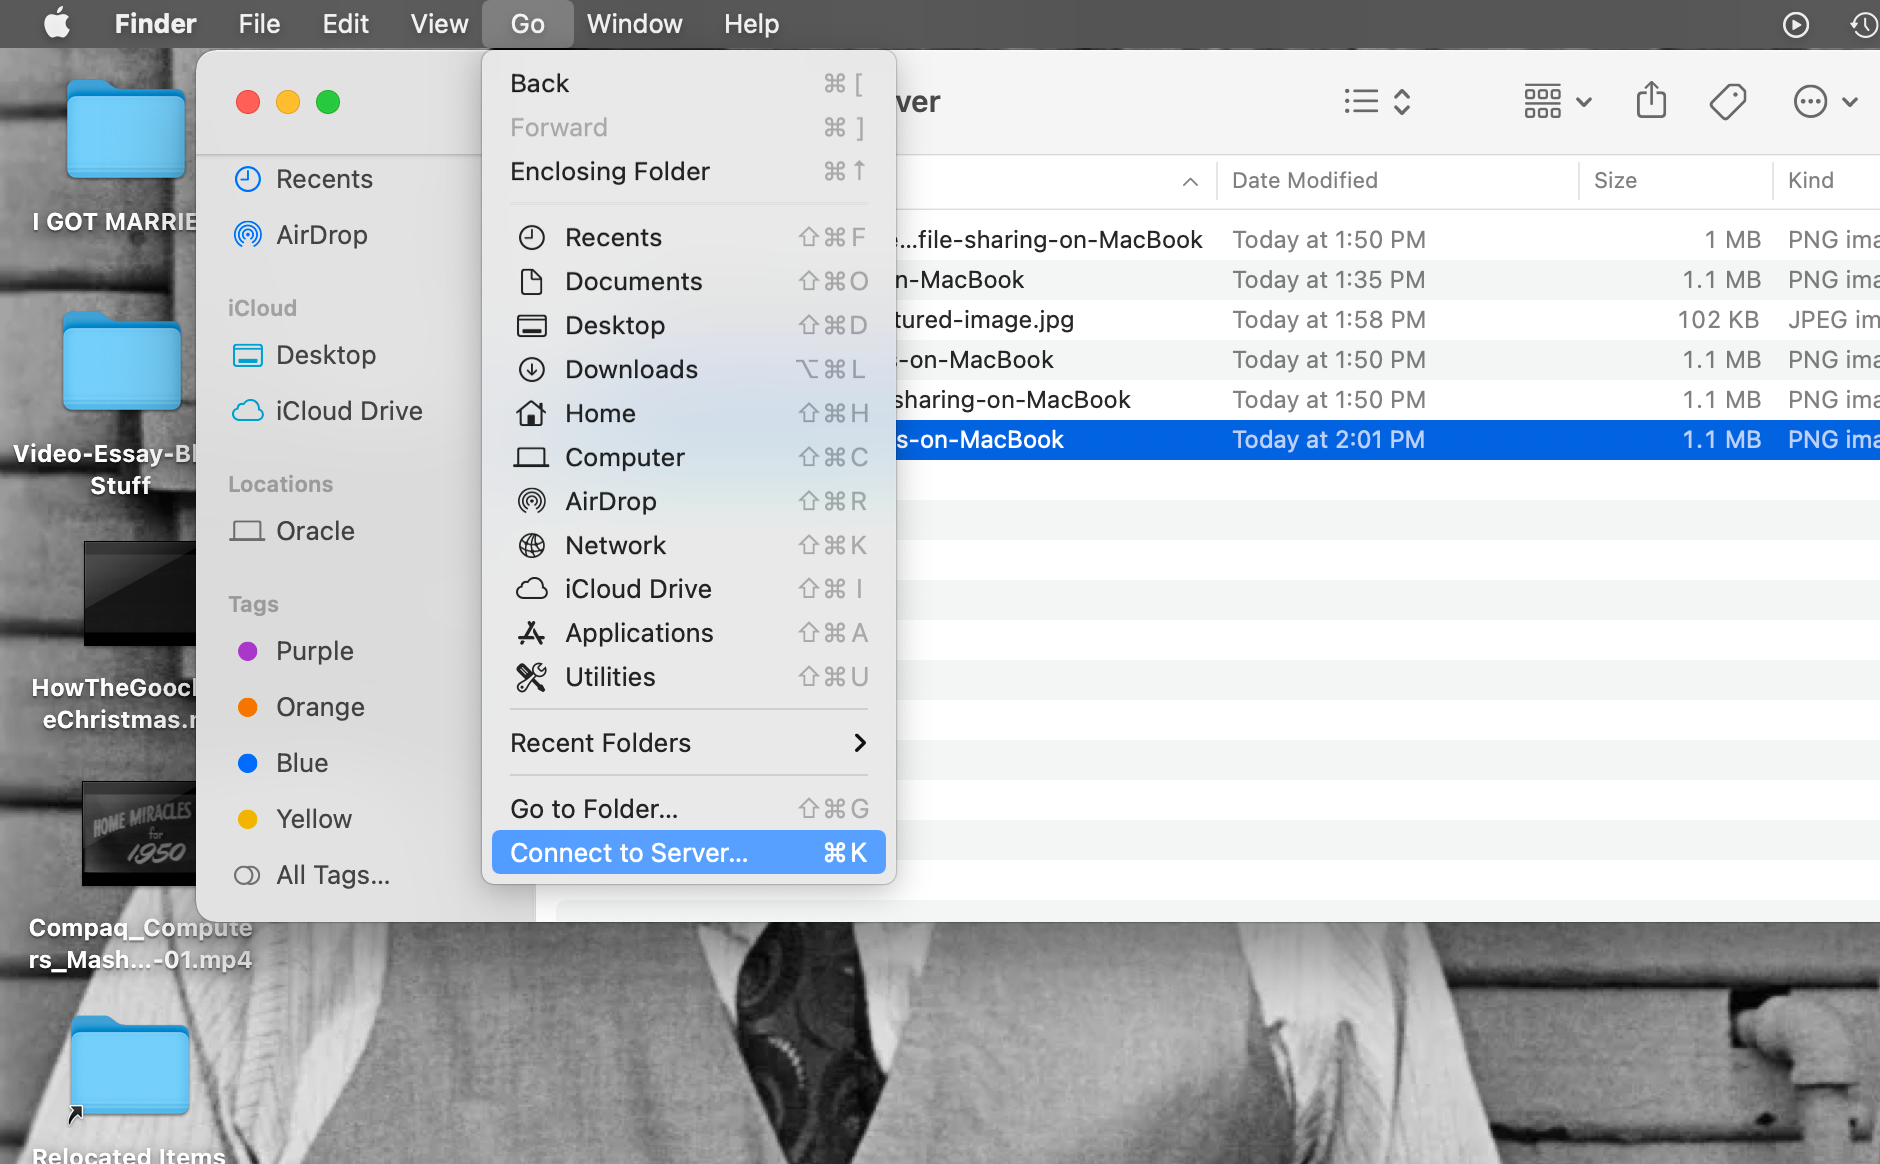 The Go drop down menu open in front of a Finder window. Locations is visible in the menu on the left of the Finder window